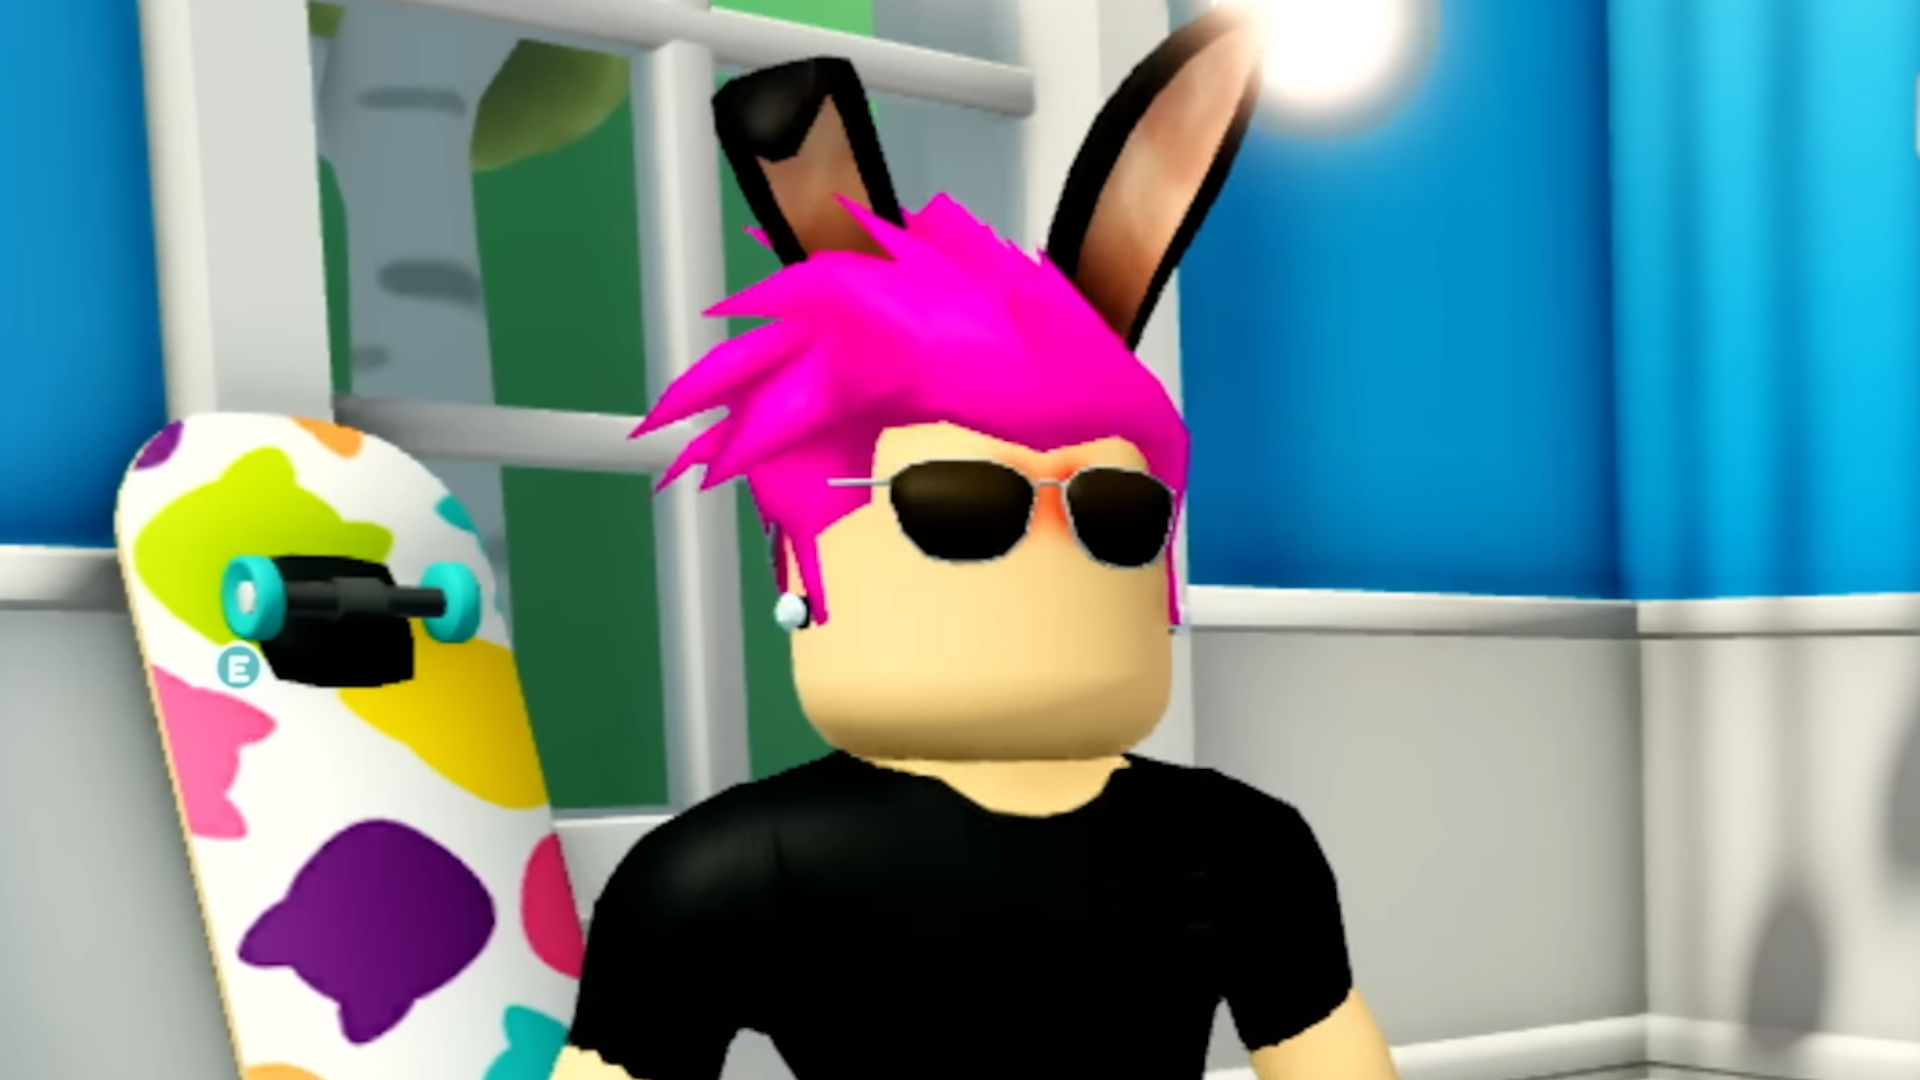 Roblox is making UGC items LIMITED! ty @xekroblox for showing me